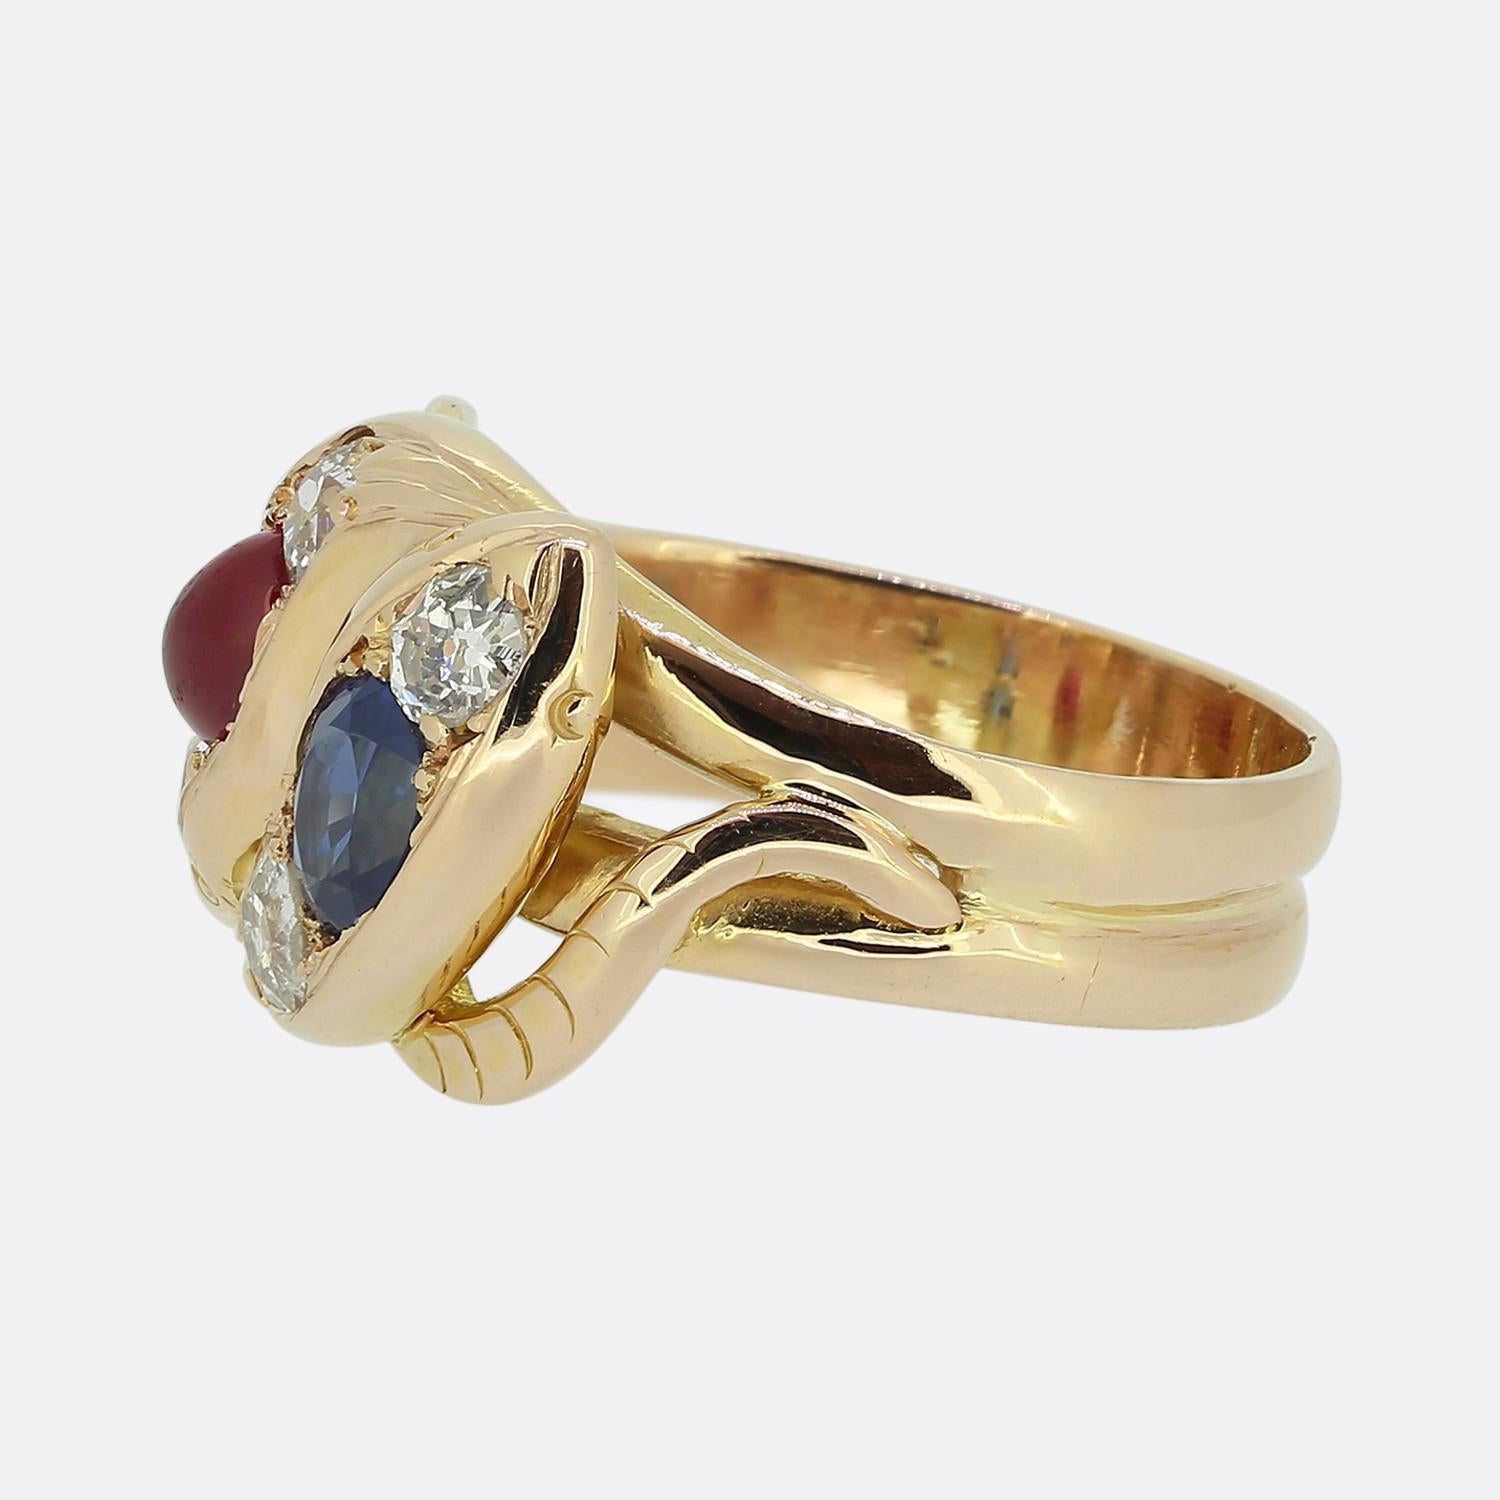 Here we have a stunning double snake ring dating back to the Victorian period. Crafted from 18ct rose gold, this ring features two snake heads, one of which is set with an oval faceted medium-blue sapphire whilst the other is set with a round